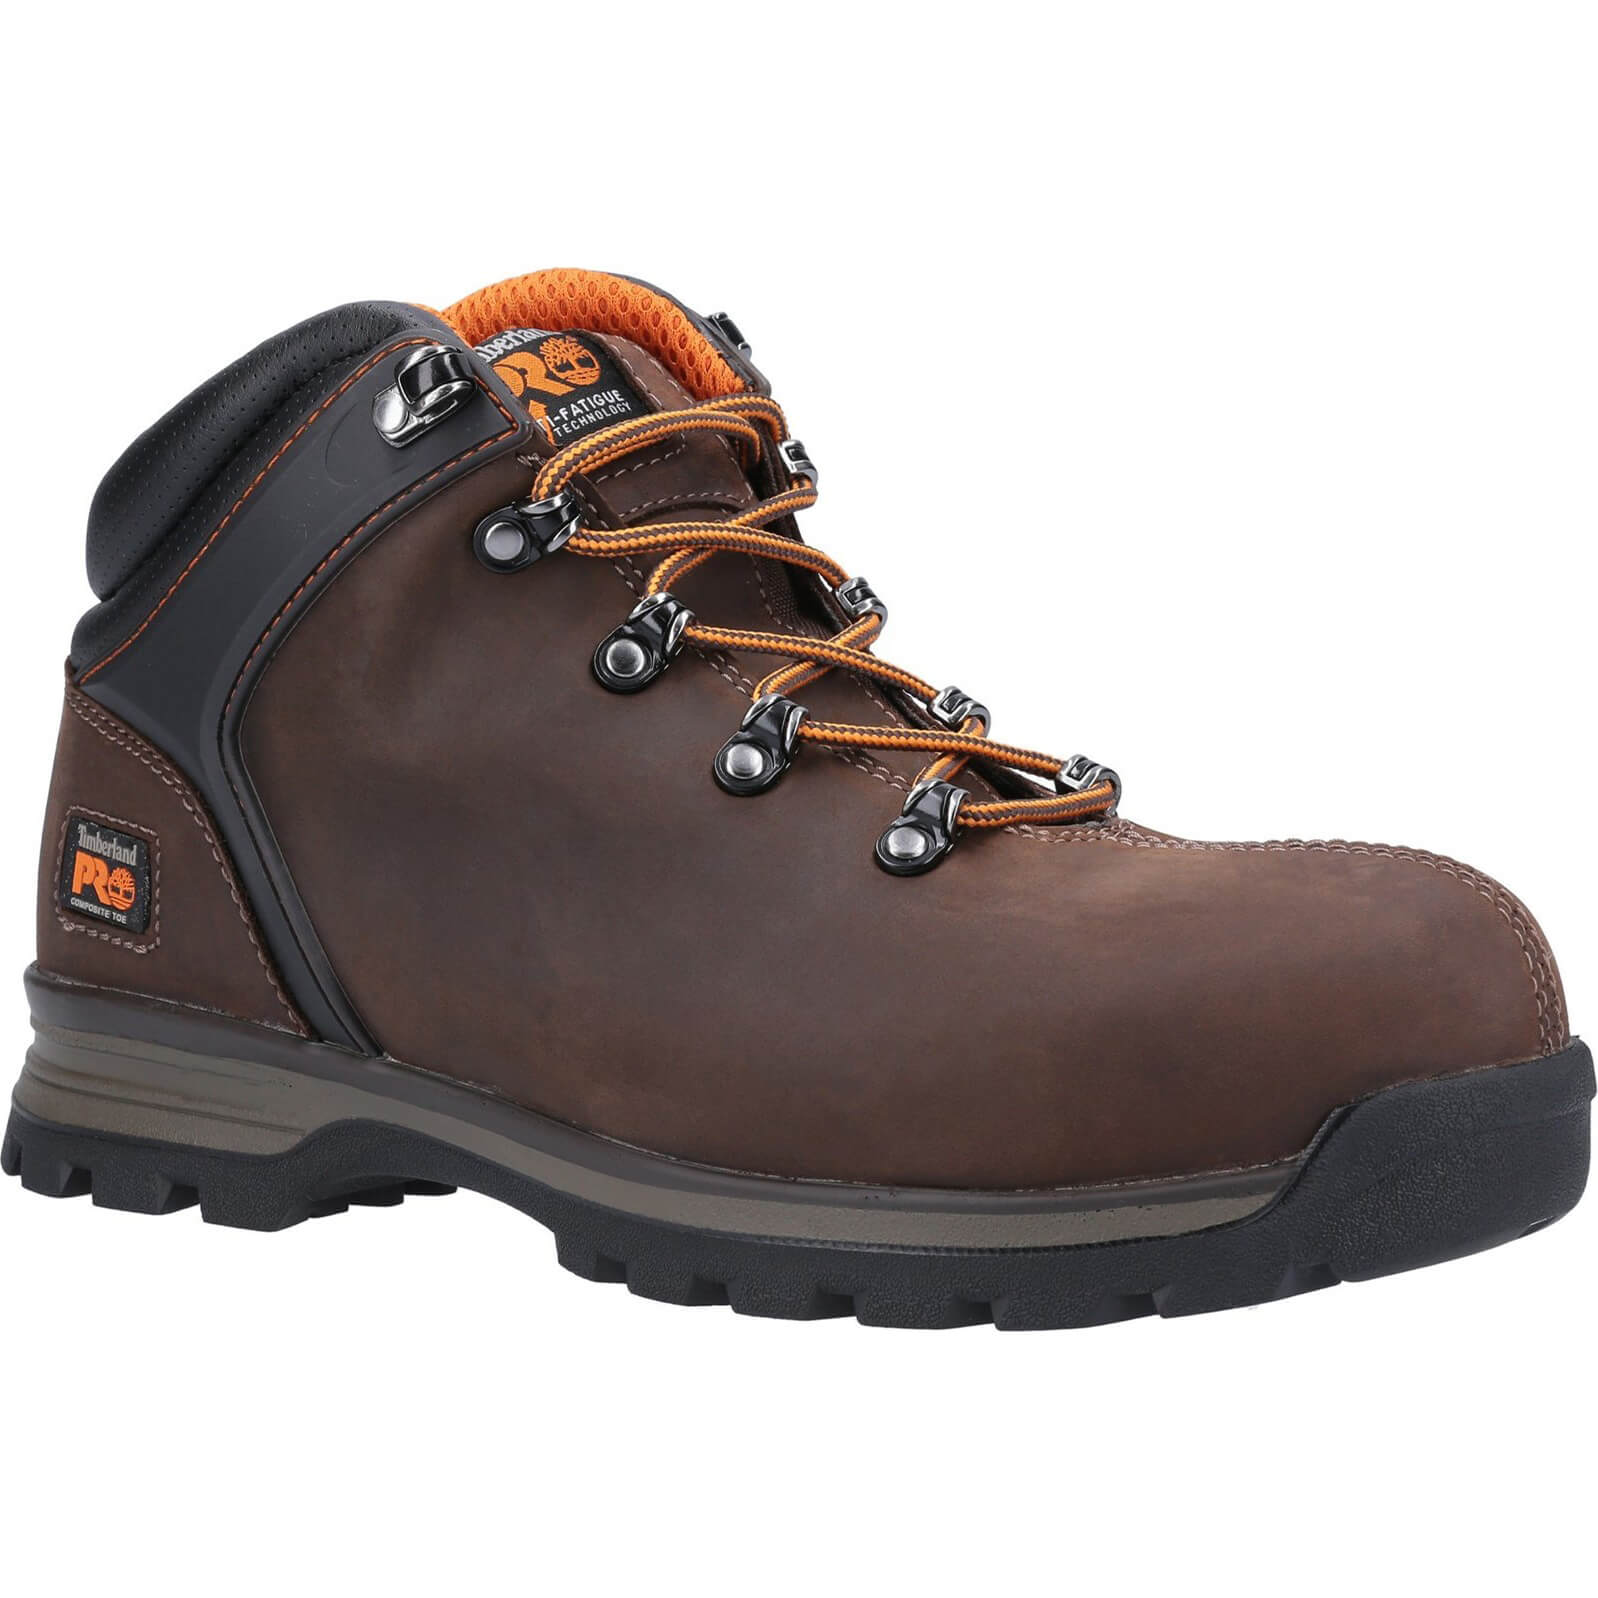 Image of Timberland Pro Splitrock XT Composite Safety Toe Work Boot Brown Size 12